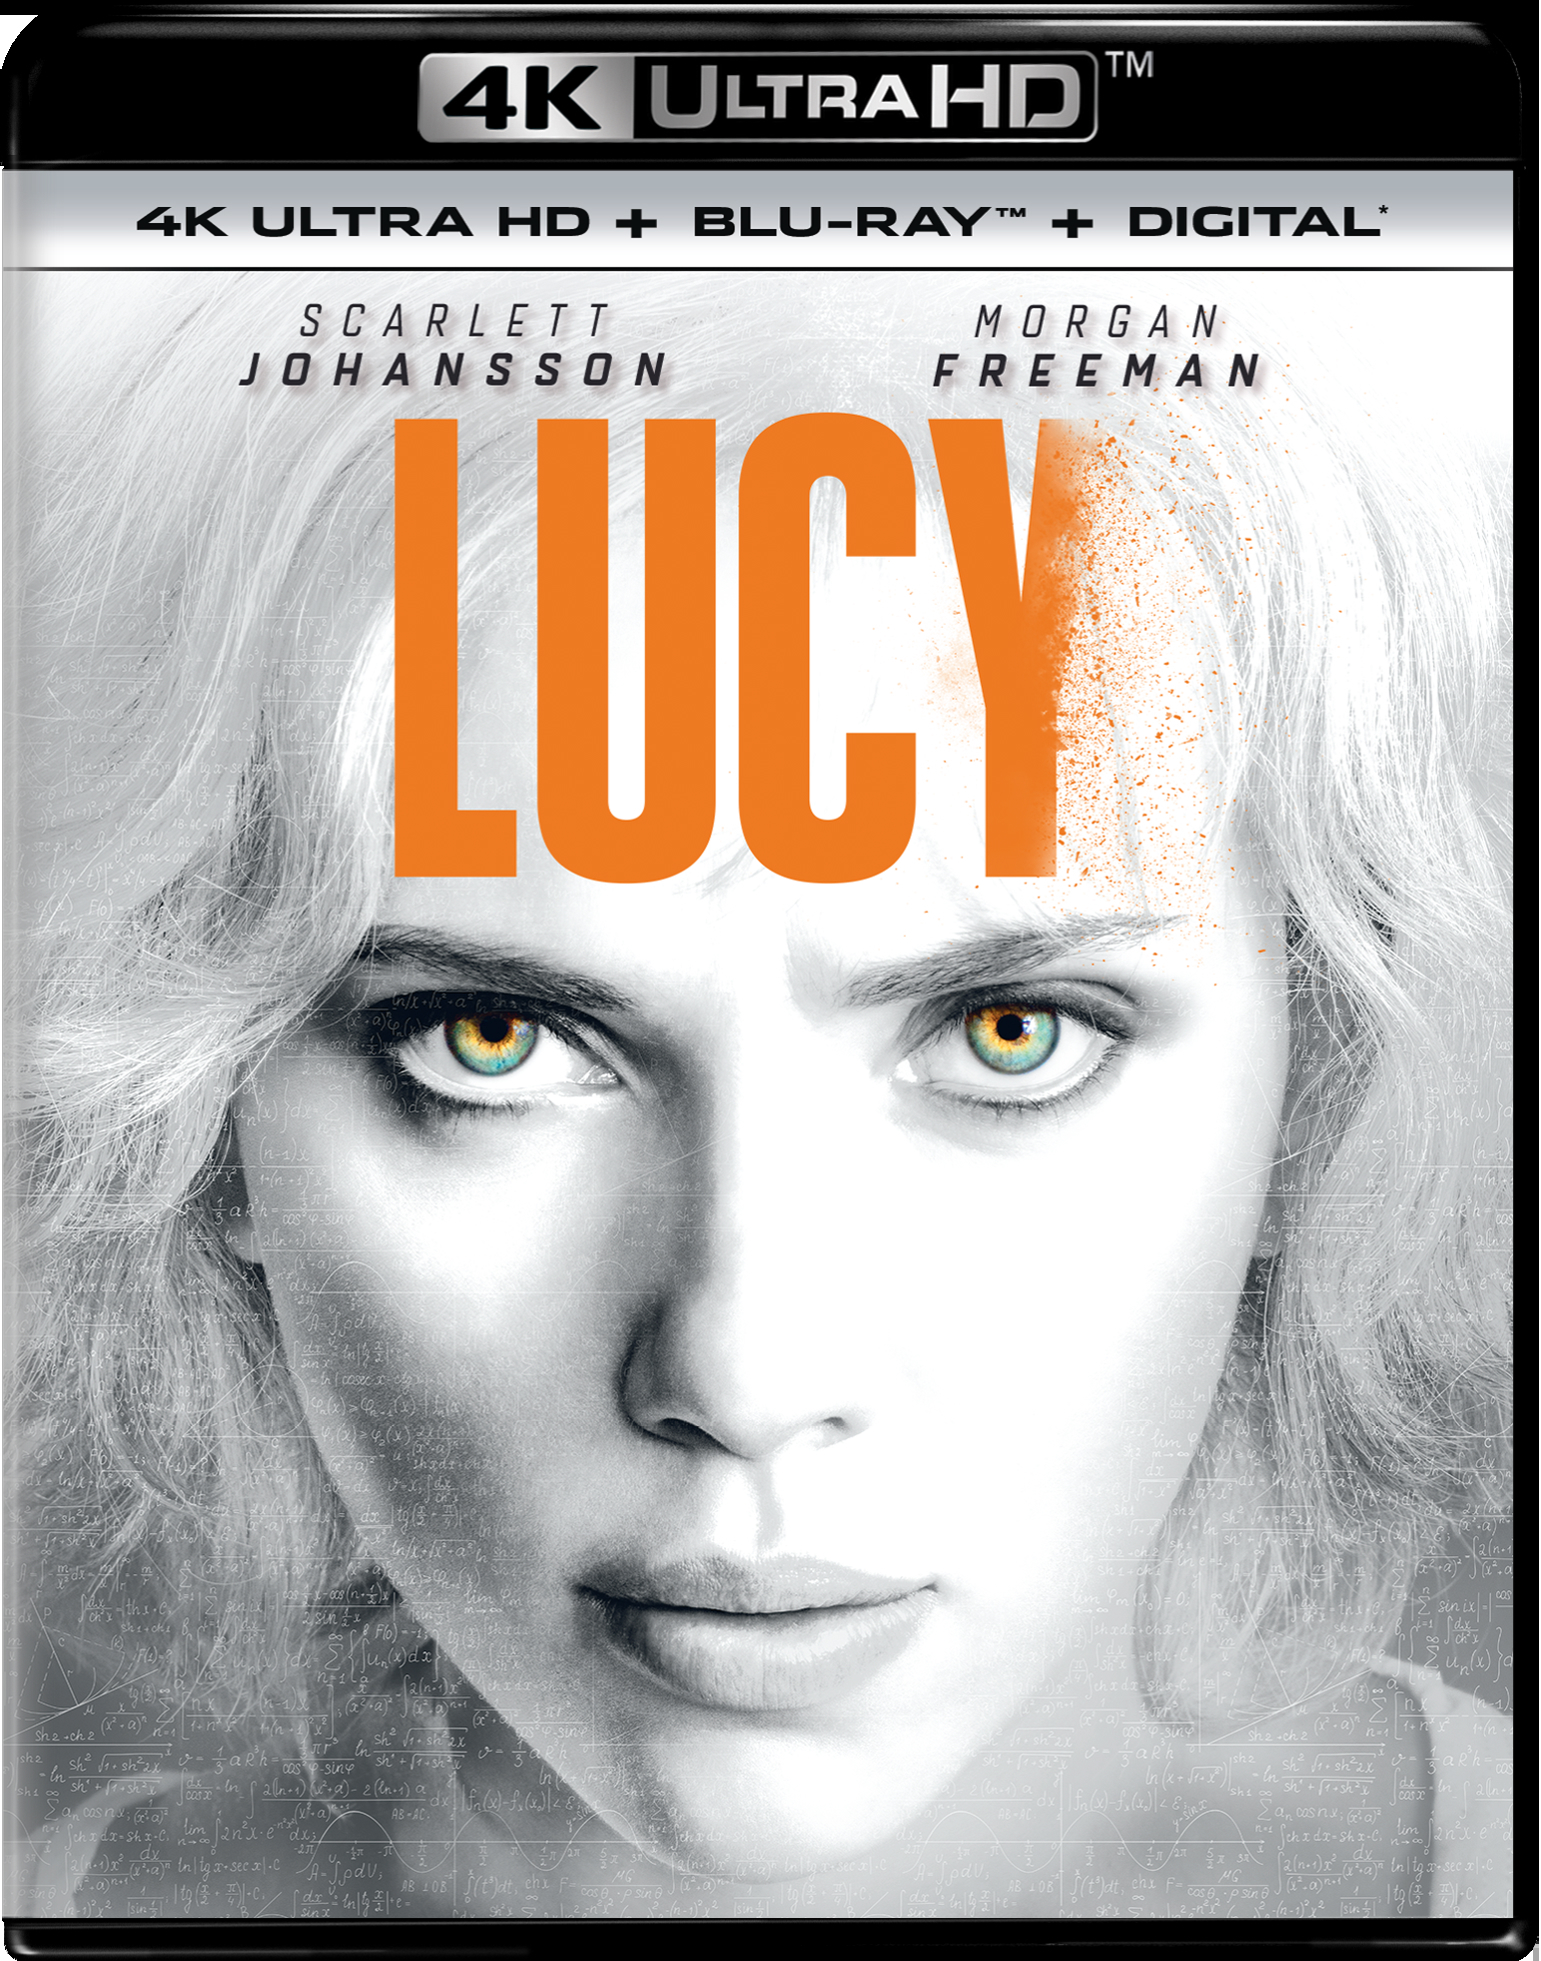 Lucy (4K Ultra HD) - UHD [ 2014 ]  - Action Movies On 4K Ultra HD Blu-ray - Movies On GRUV